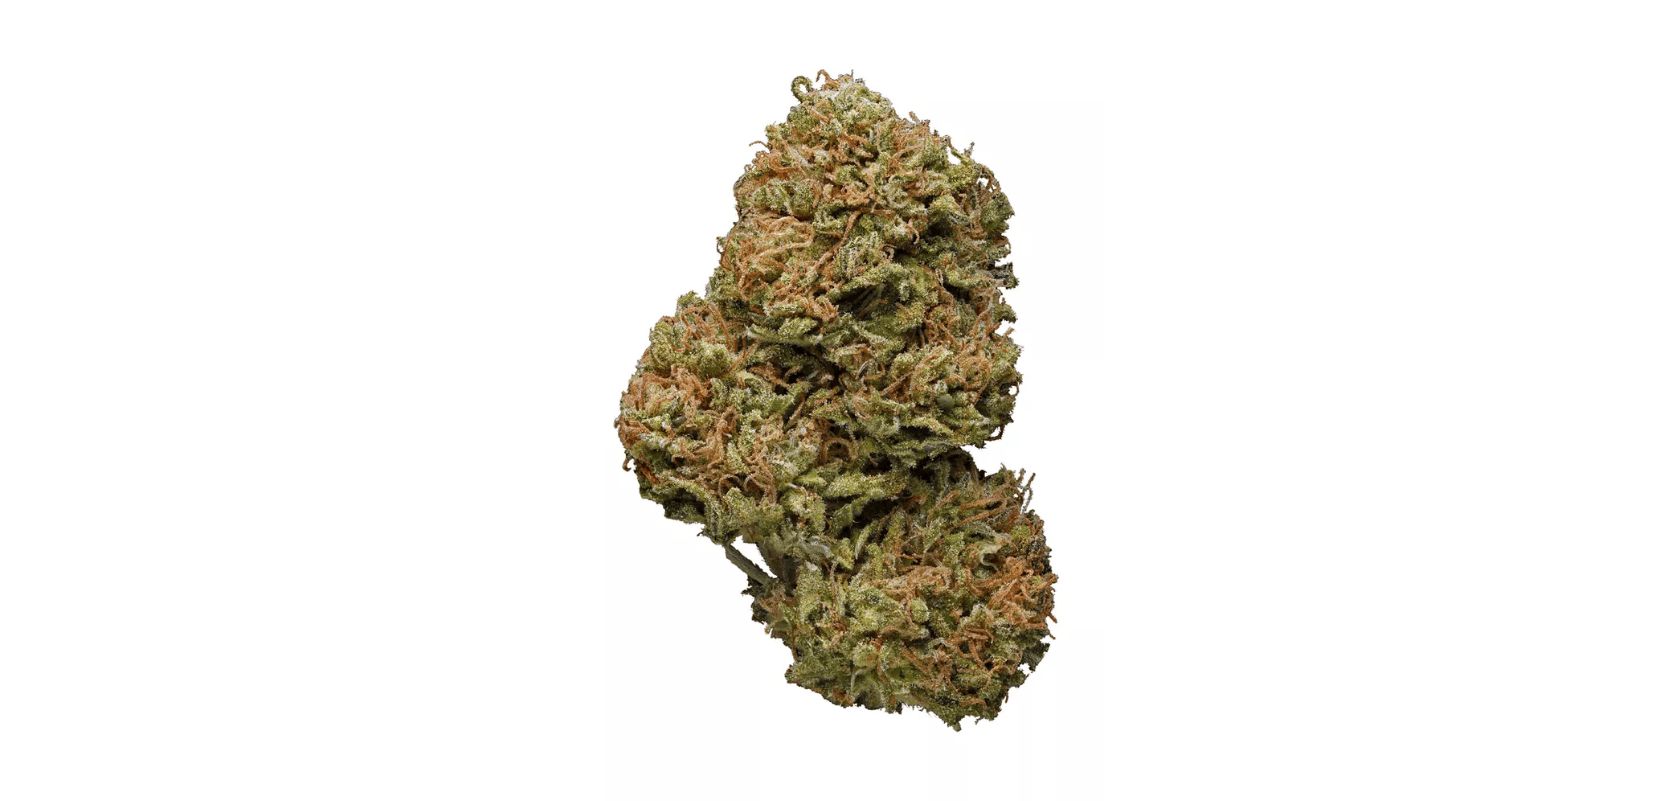 No, the Amnesia Haze is a Sativa, so we recommend using it in the morning or during the day for a quick pick-me-up.